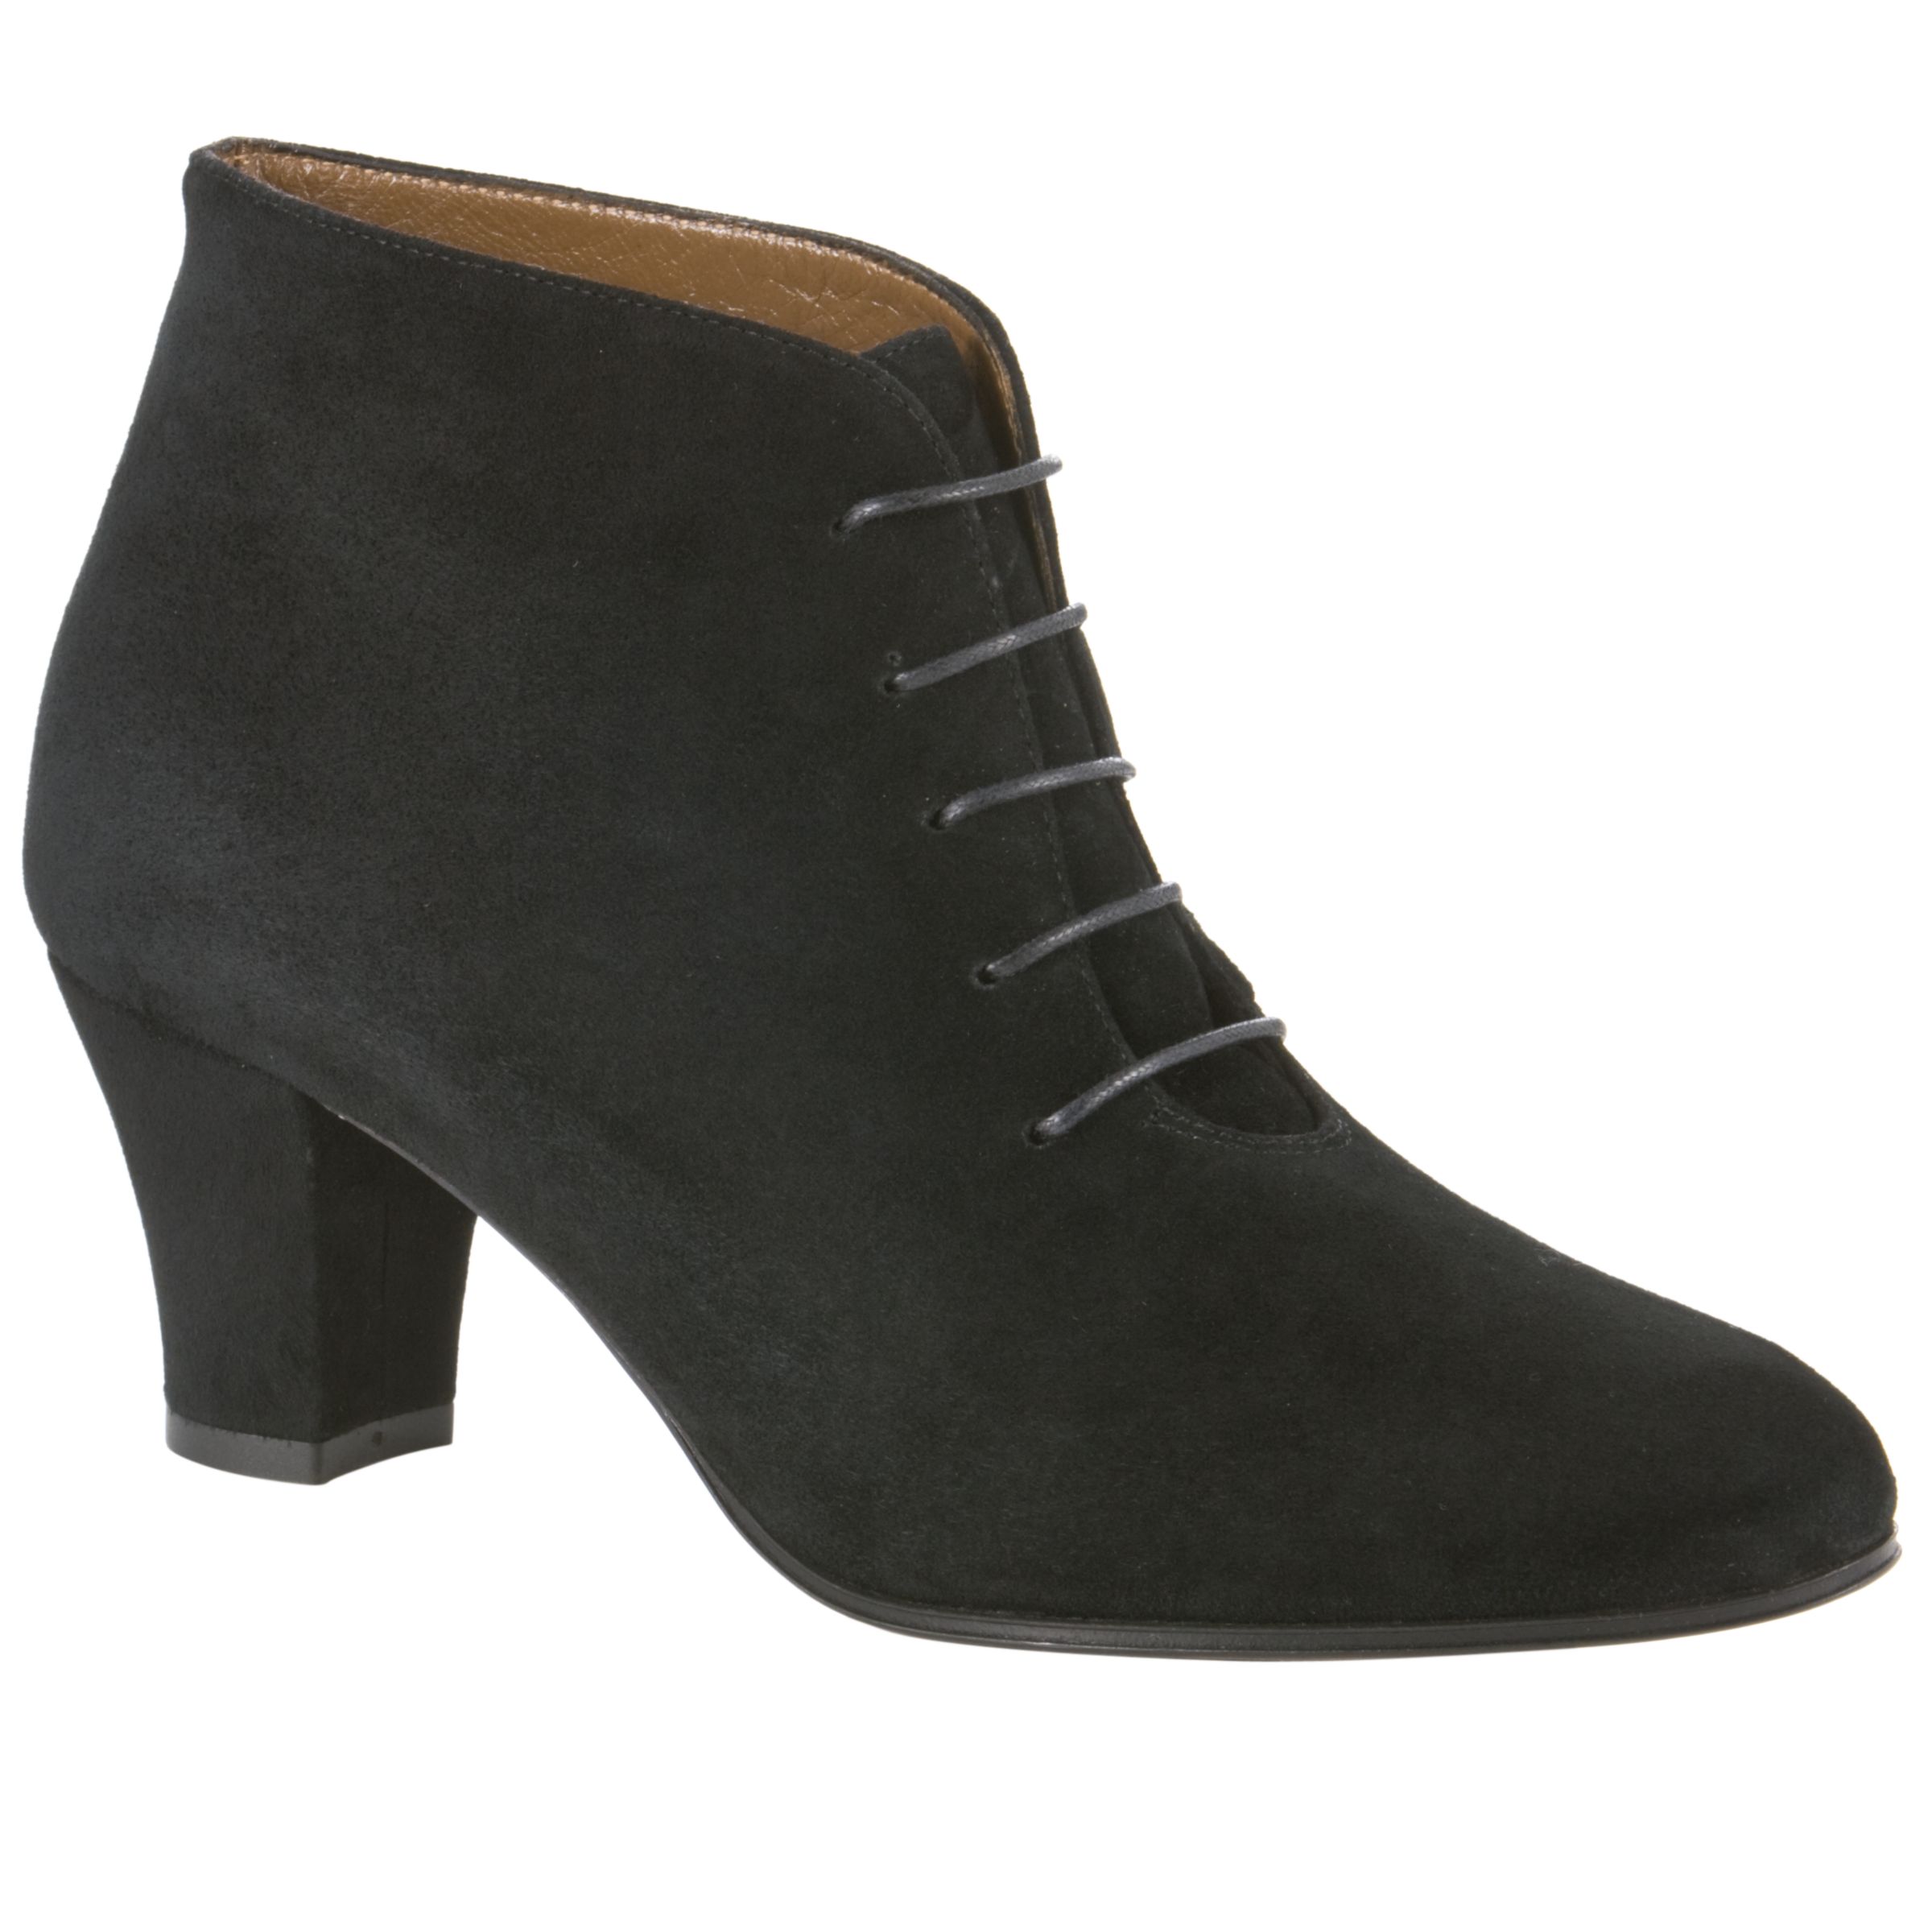 Hobbs Audley Suede Ankle Boots, Black at John Lewis